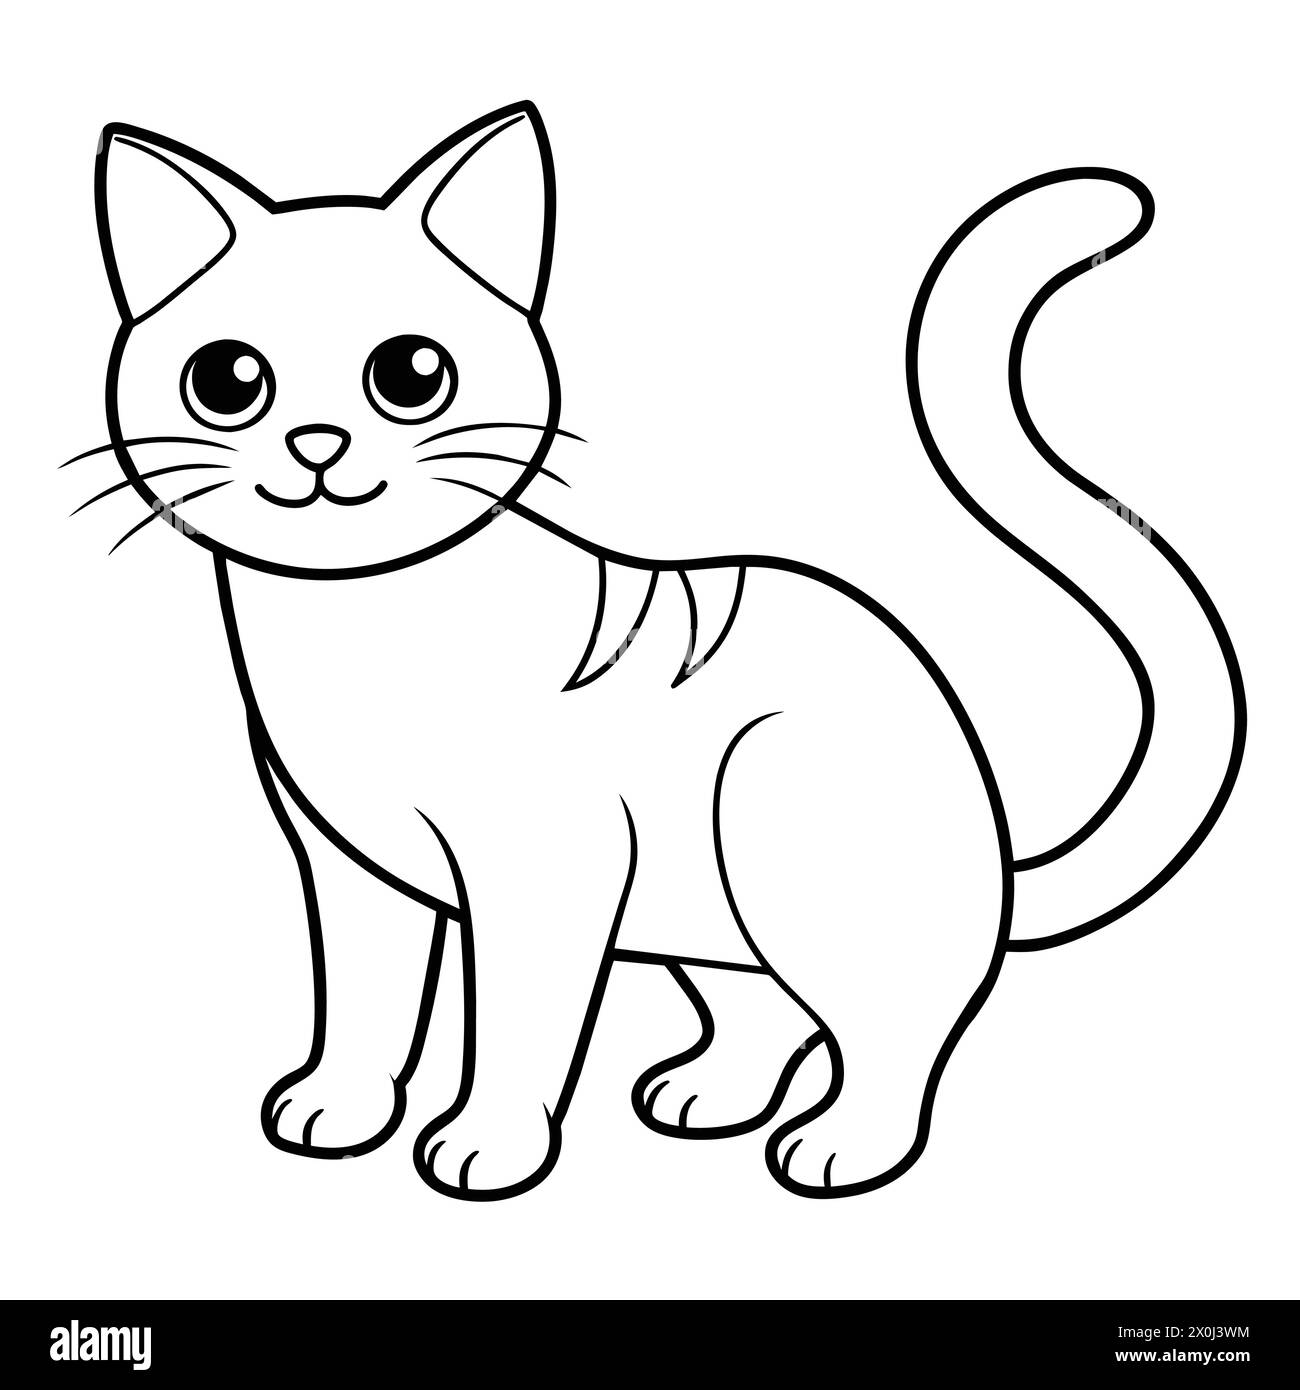 Adorable Cute Cat Illustrations - Perfect for Greeting Cards, Children's Books, and Fashionable Apparel Stock Vector